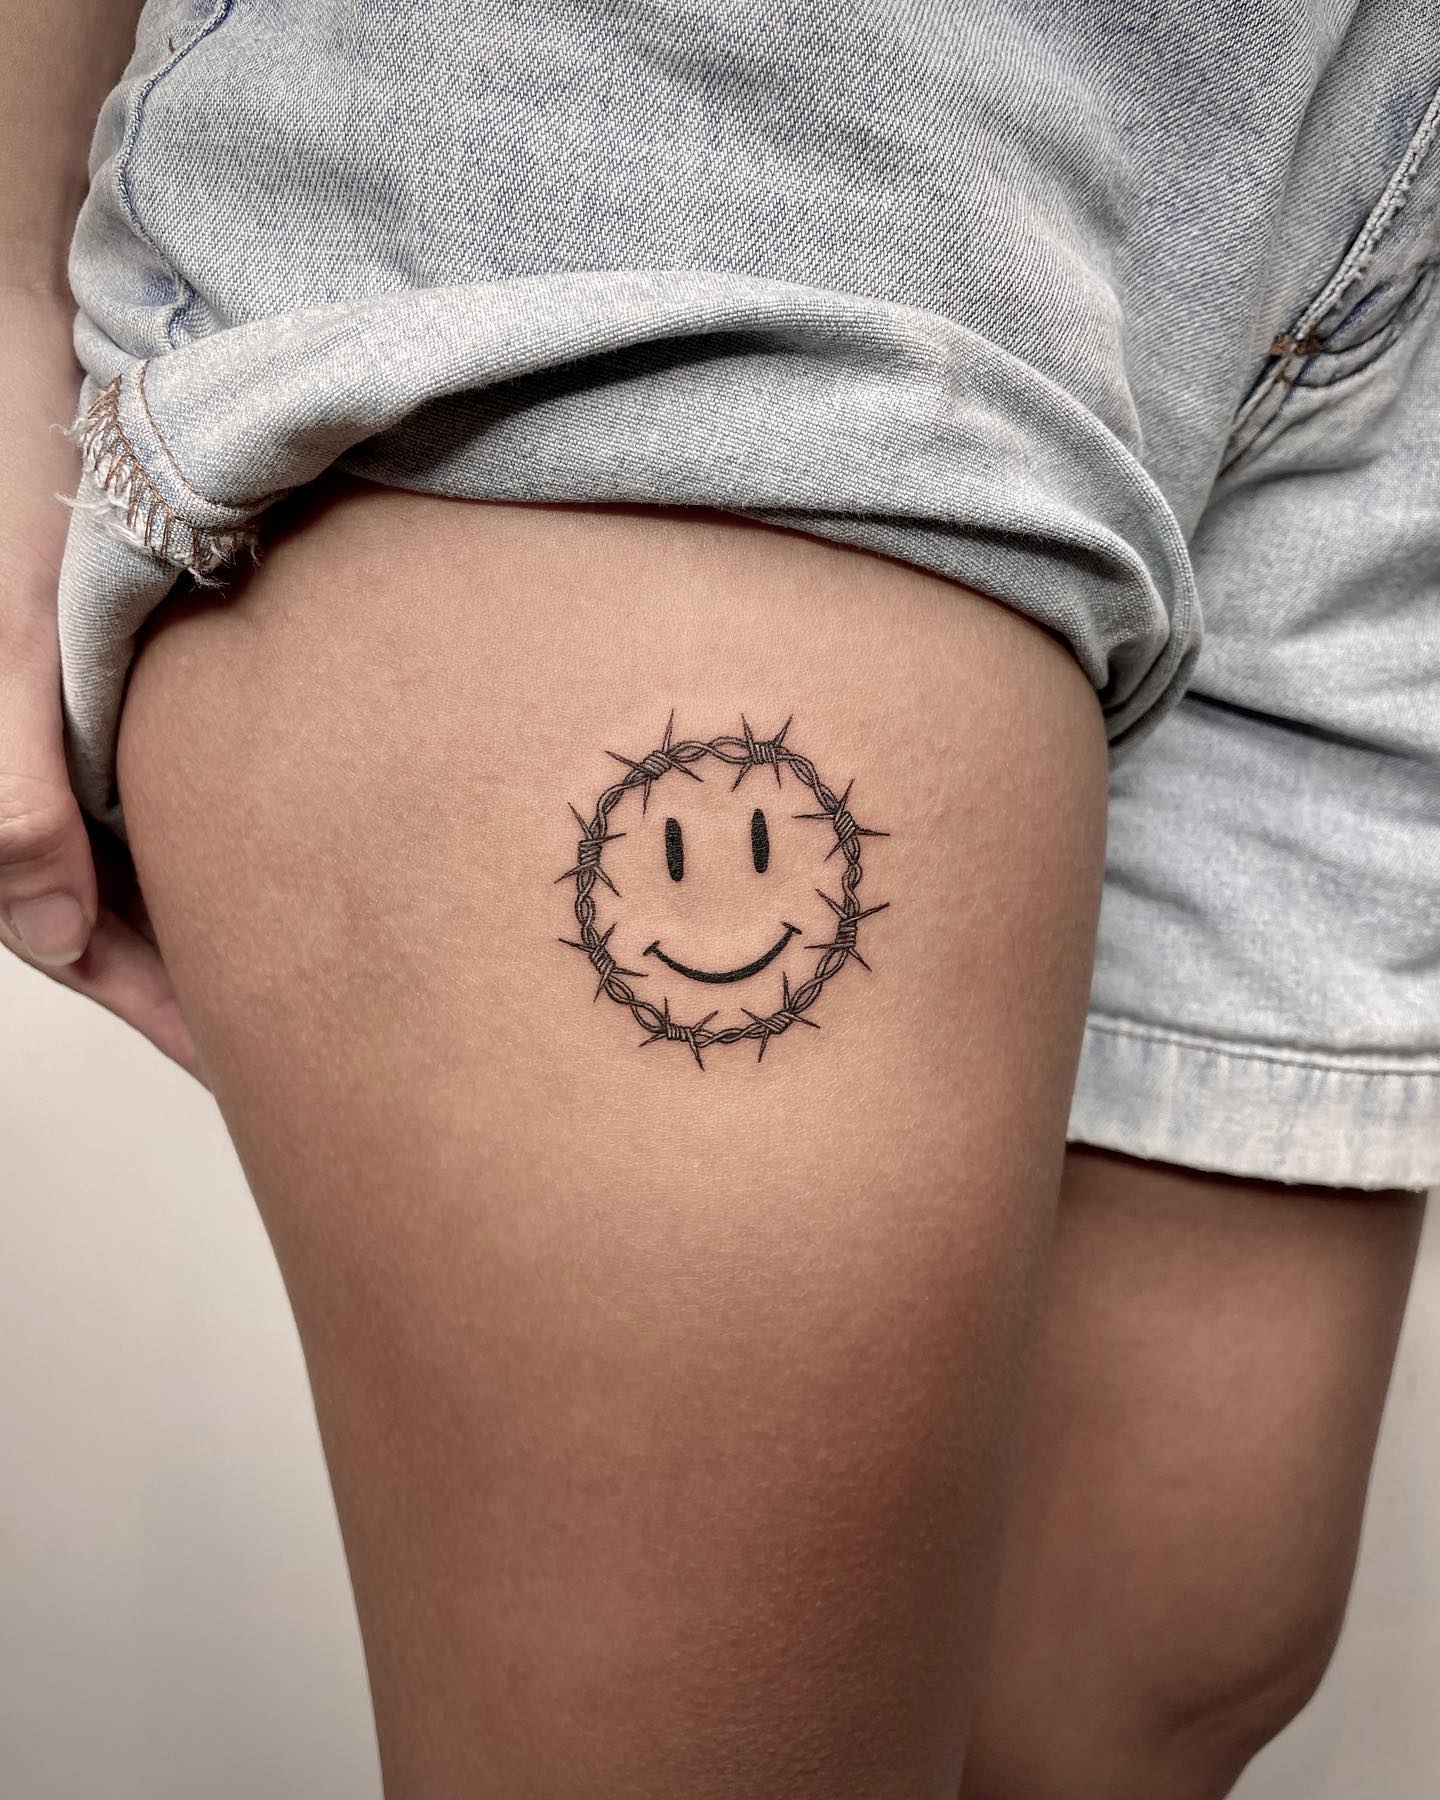 Pain is not an optional thing and people do not choose to feel it. However, there is something that you can choose: Happiness. If you choose it, you will feel better and you know what? Your pain will get easier to bear. Get this smiley tattoo with barbed wires for it.